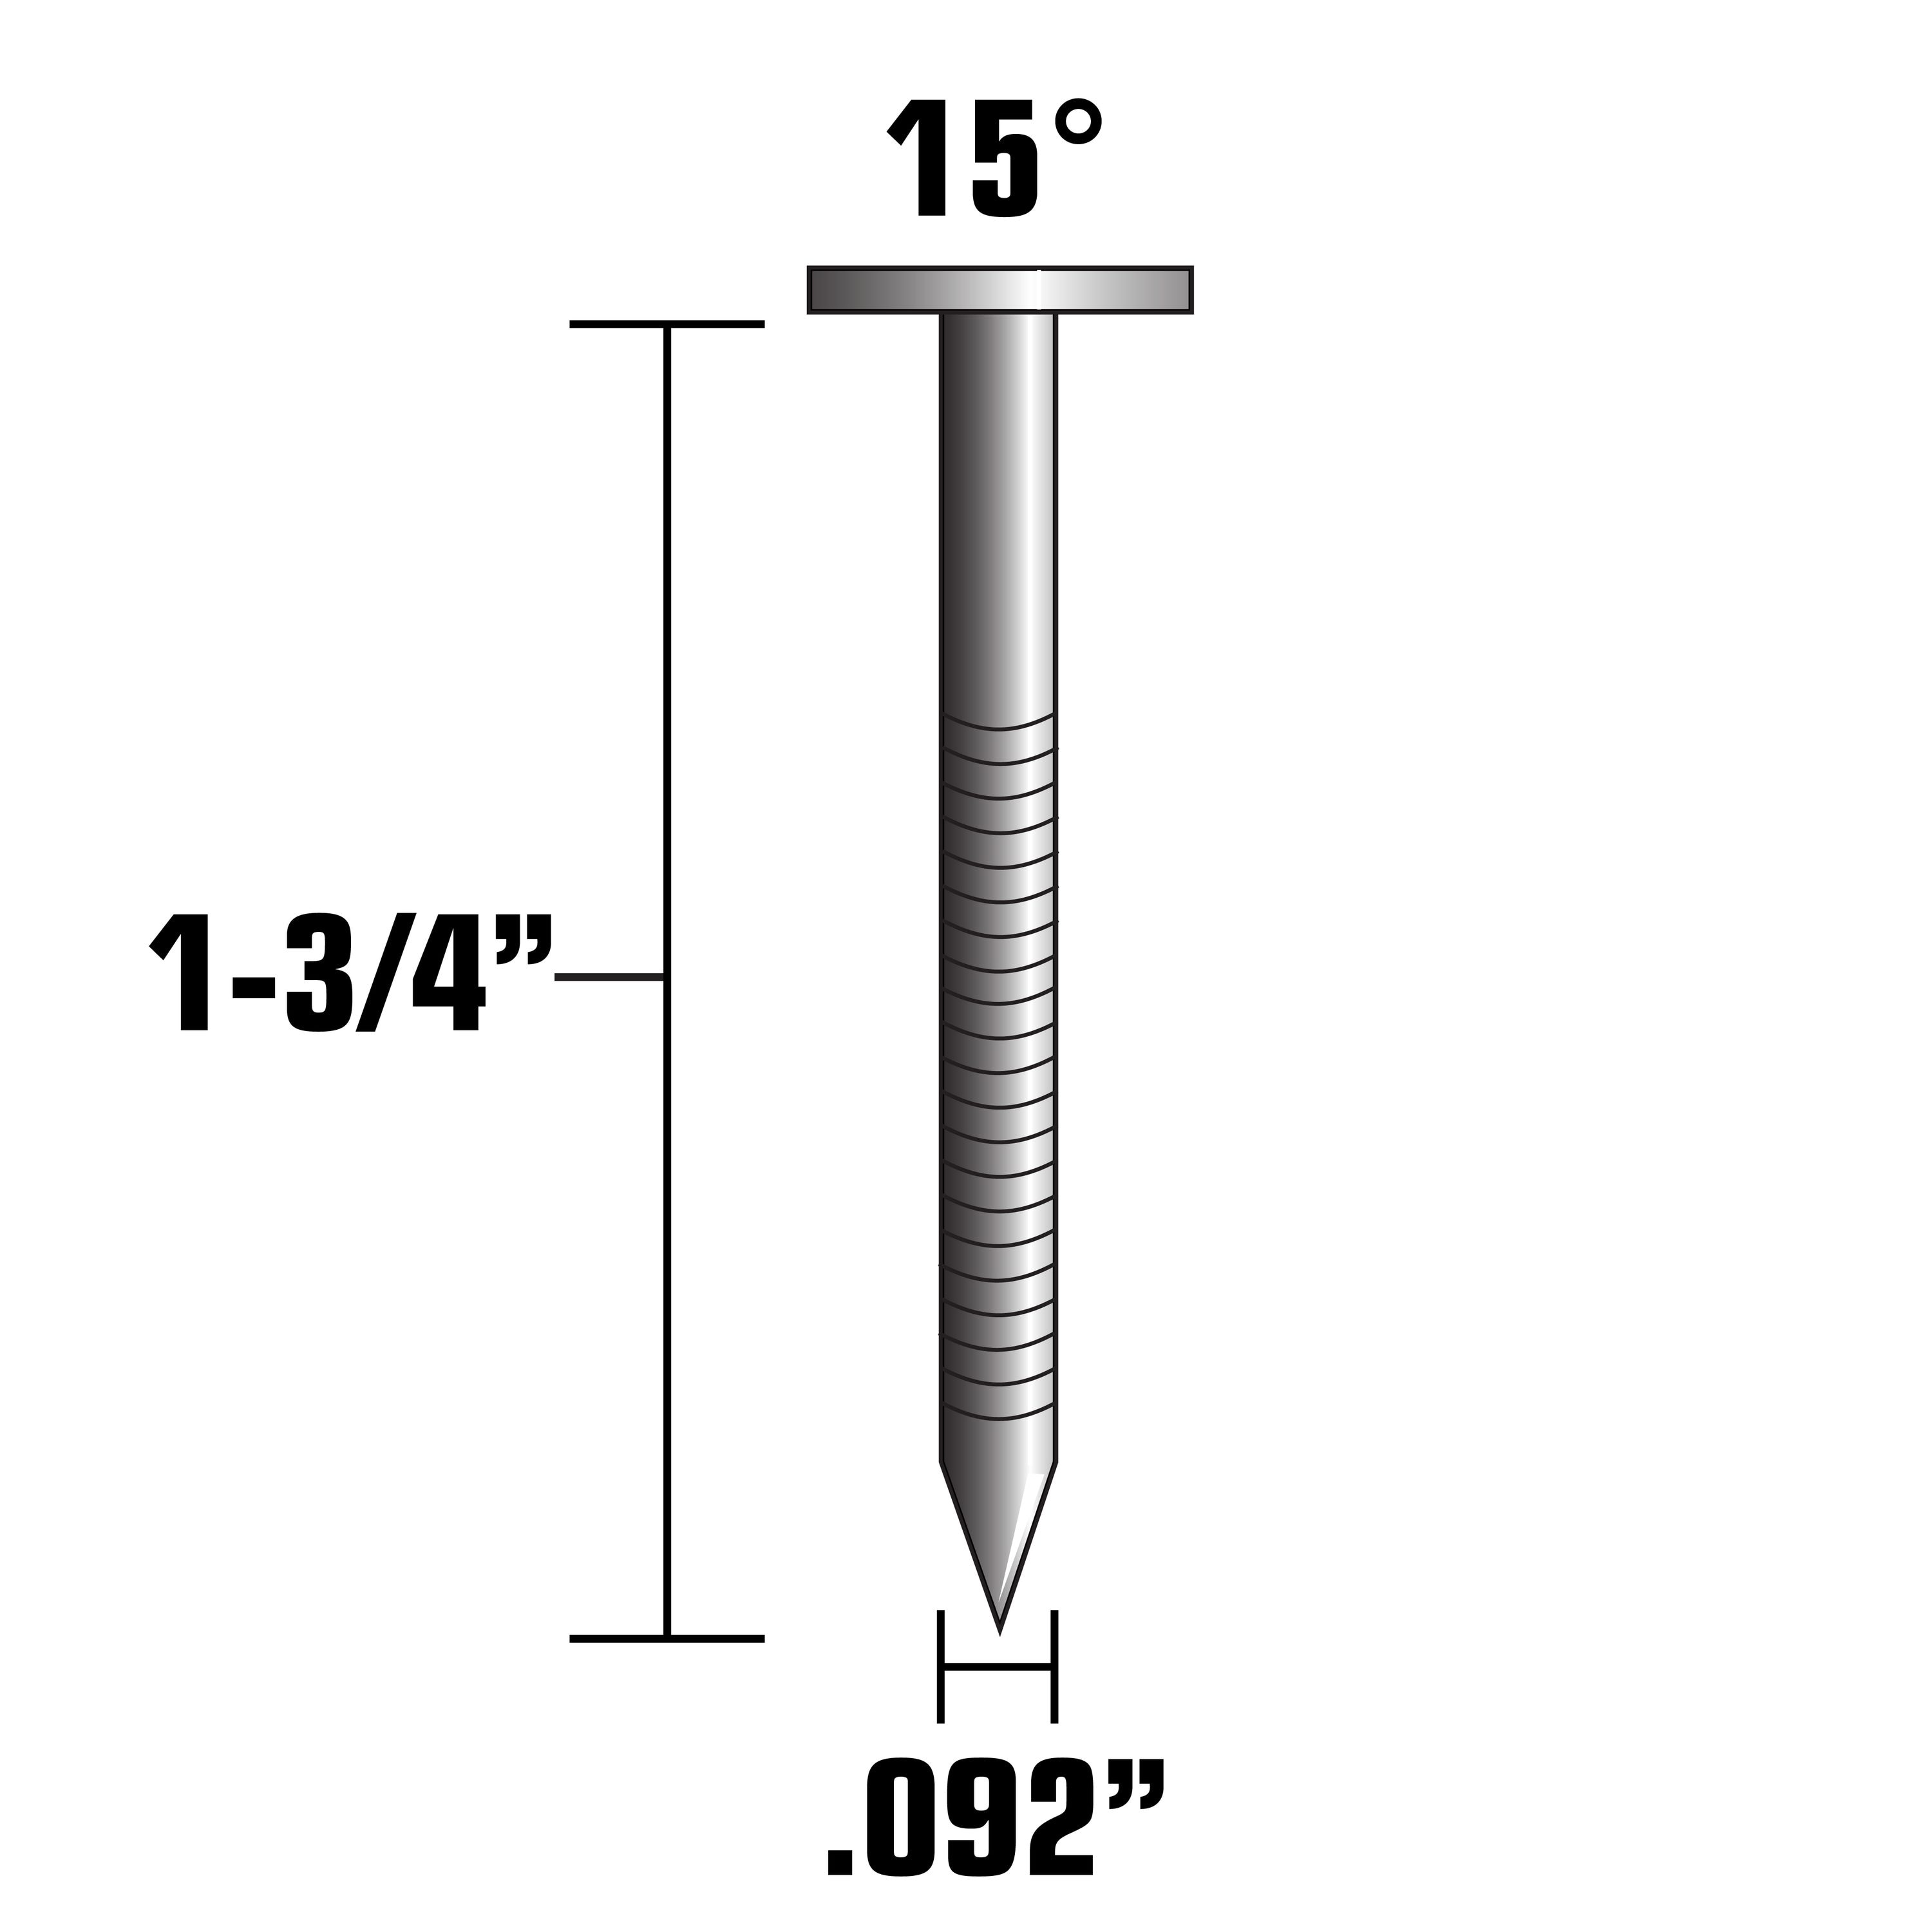 Made in USA Coil Nails 1 3/4" x 083" Screw Shank 15 Degree for Bostitch 3,200 